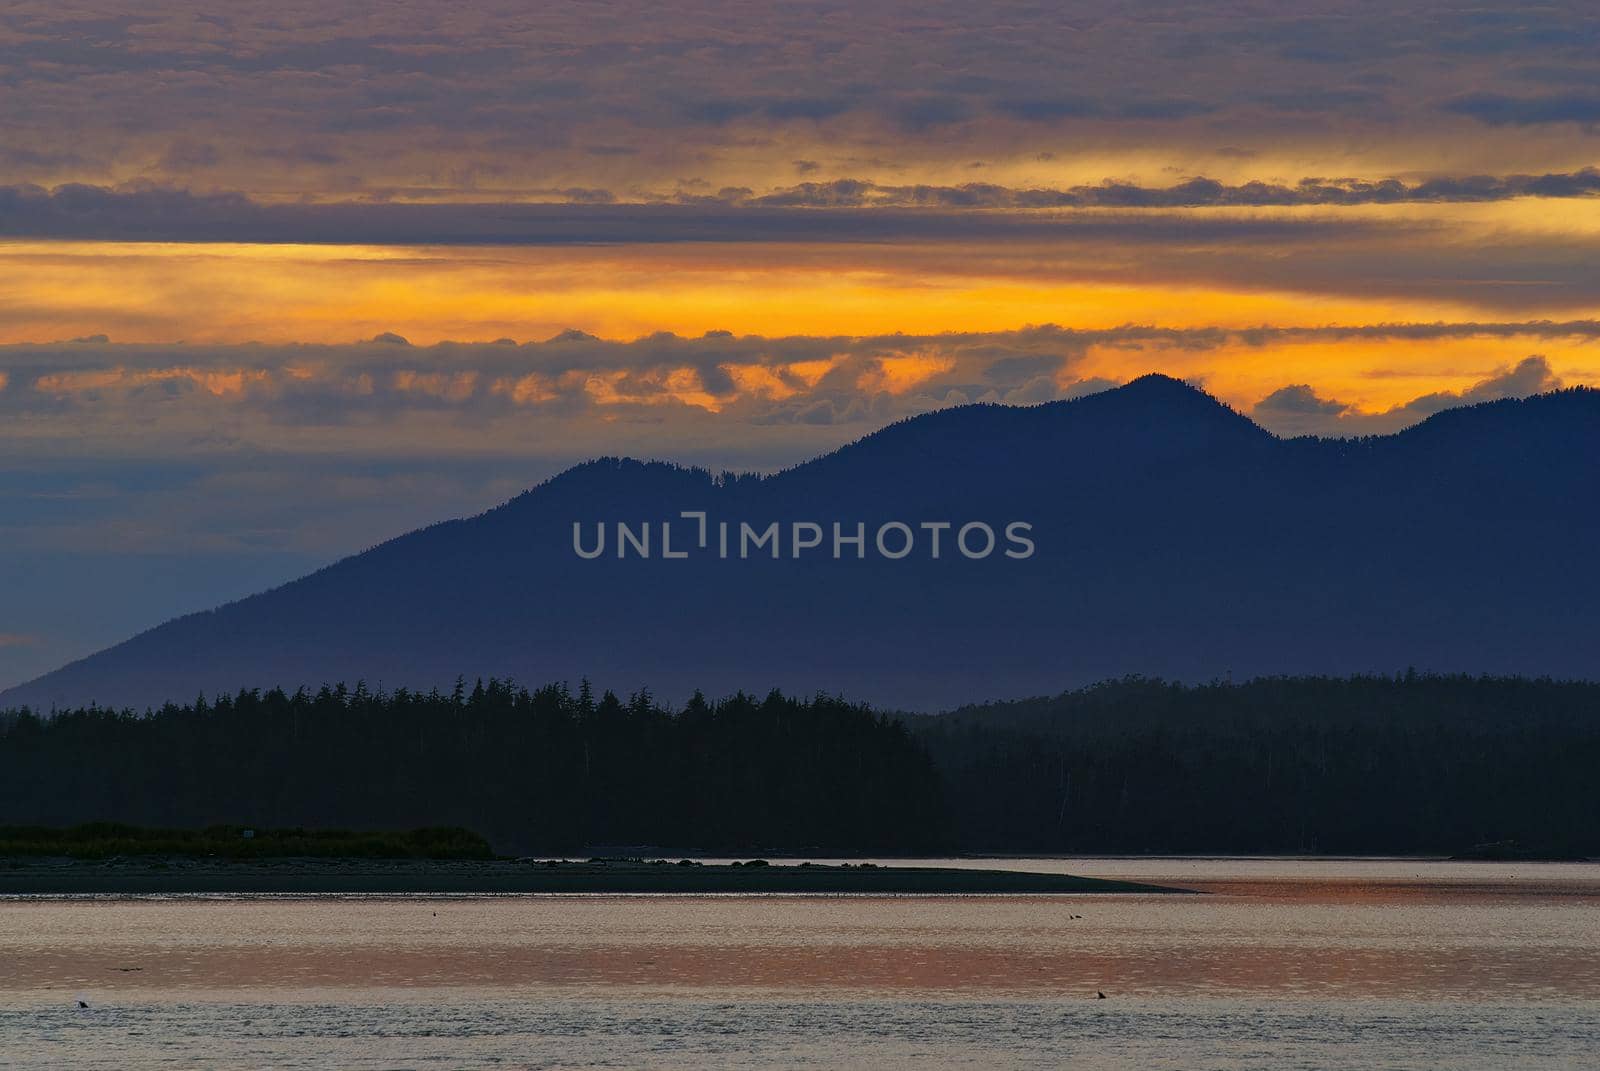 Sunset View of Mountains from Tofino on Vancouver Island in Canada by markvandam